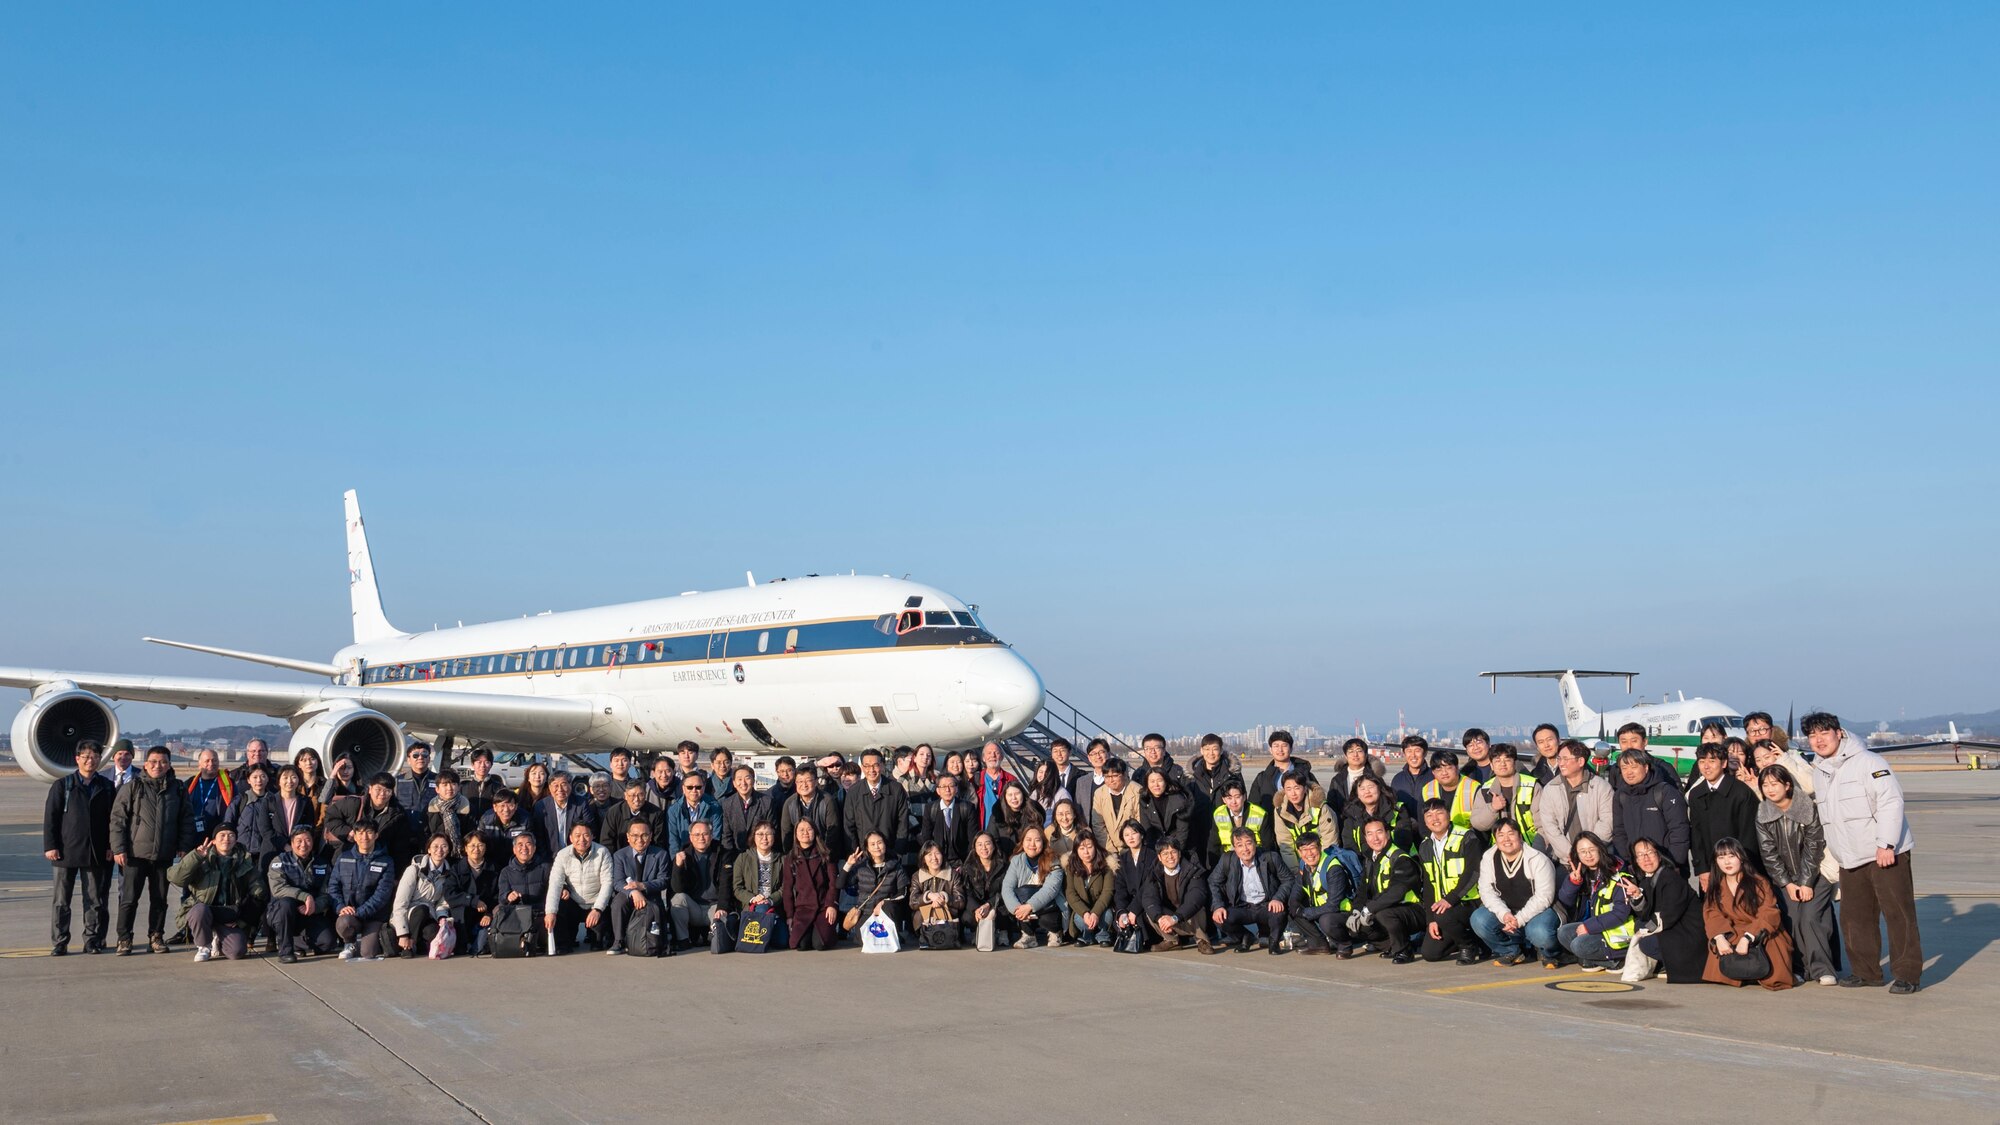 National Aeronautics and Space Administration and National Institute of Environmental Research members take a group photo during the Airborne and Satellite Investigation of Asian Air Quality, or ASIA-AQ, open house at Osan Air Base, Republic of Korea, Feb. 16, 2024. More than 200 participants with ASIA-AQ from NASA, NIER, and other students and researchers held various events at Osan AB allowing subject matter experts to share their efforts in collecting detailed air quality atmospheric data. (U.S. Air Force photo by Staff Sgt. Aubree Owens)